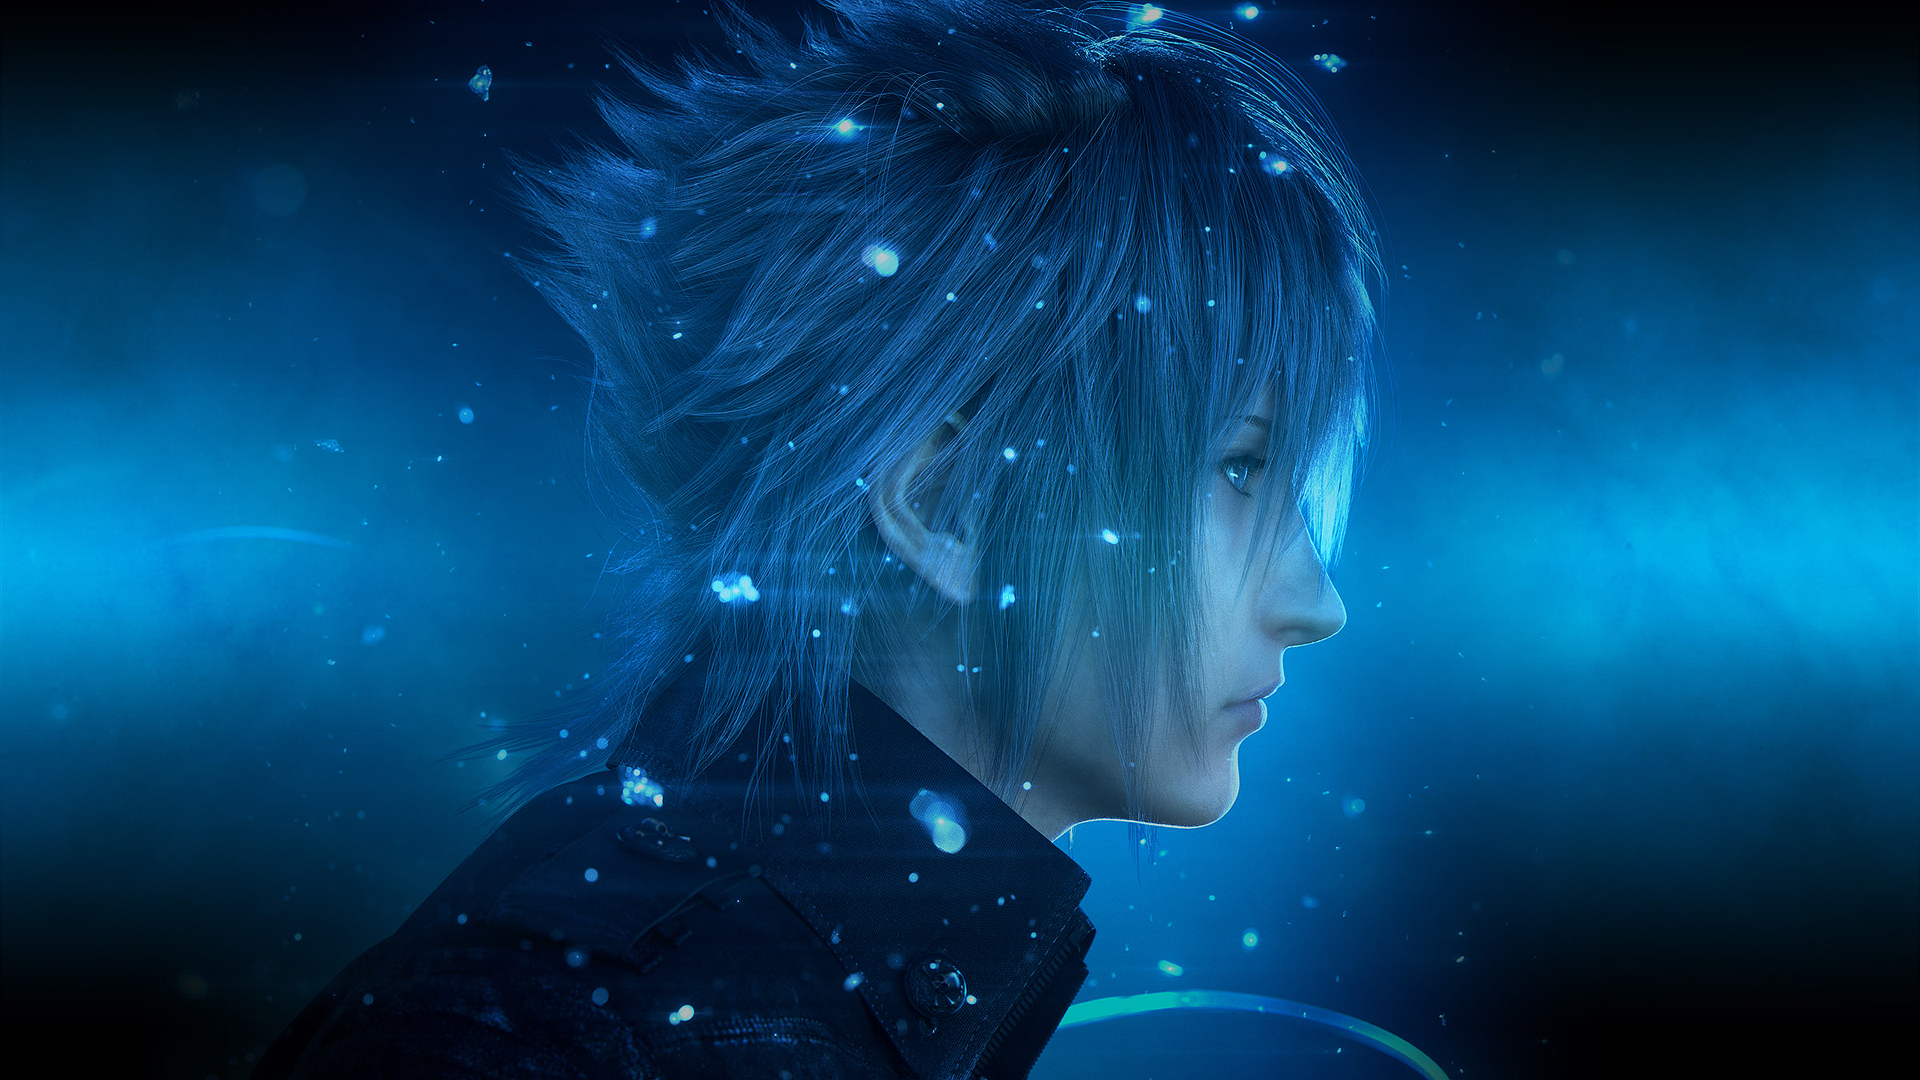 Free Download Image Noctis Promo Ffxvjpg The Final Fantasy Wiki Years Of X For Your